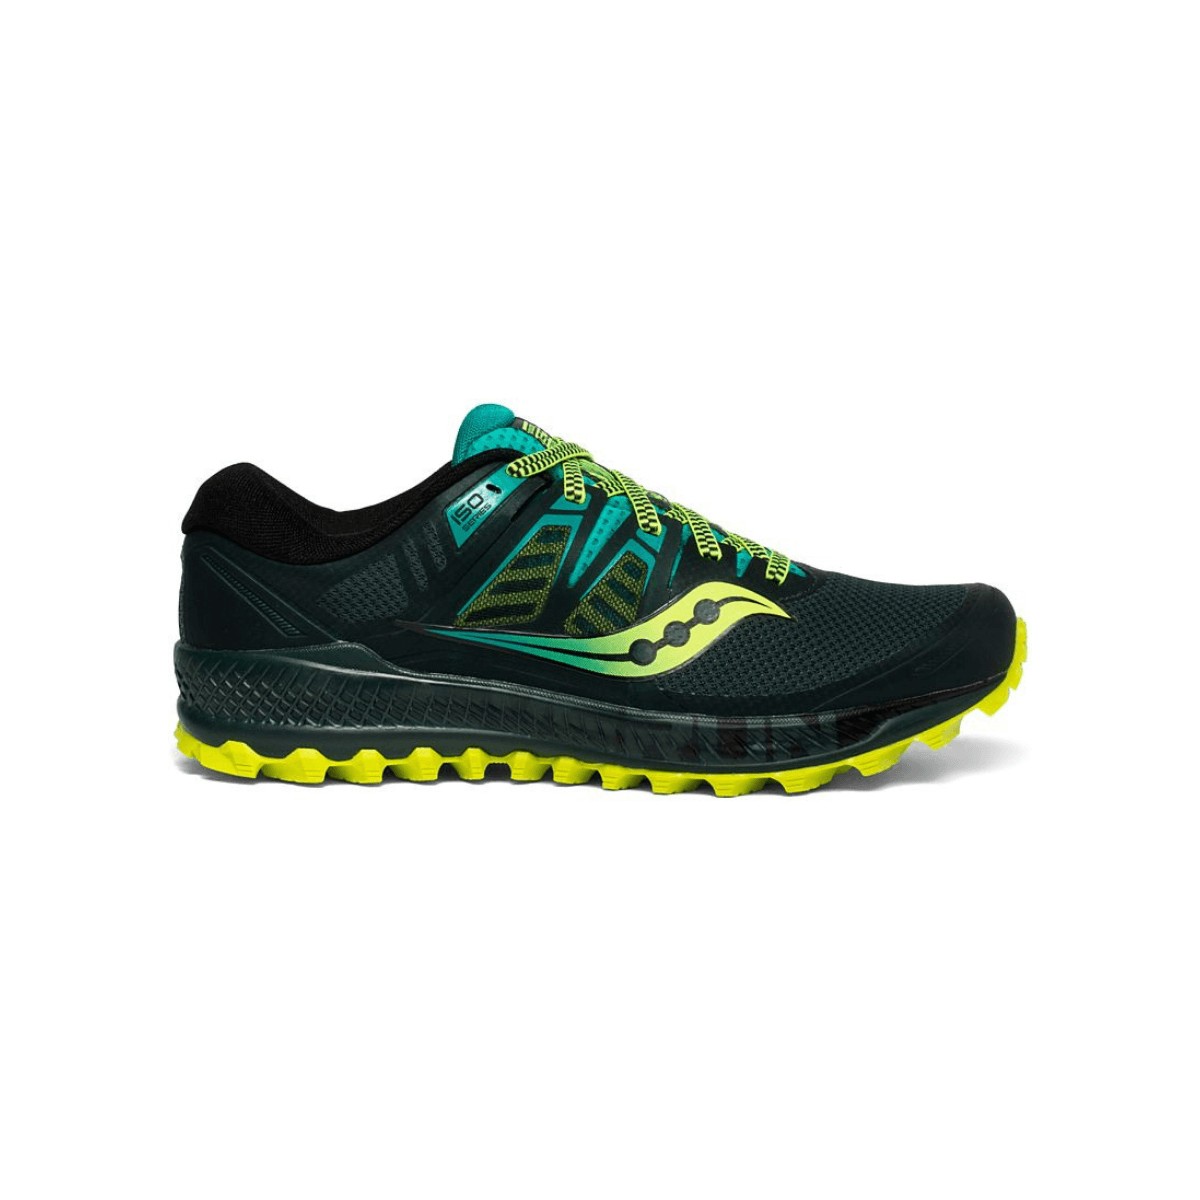 Trail Saucony Peregrine ISO Green AW19 Men's Running Shoes